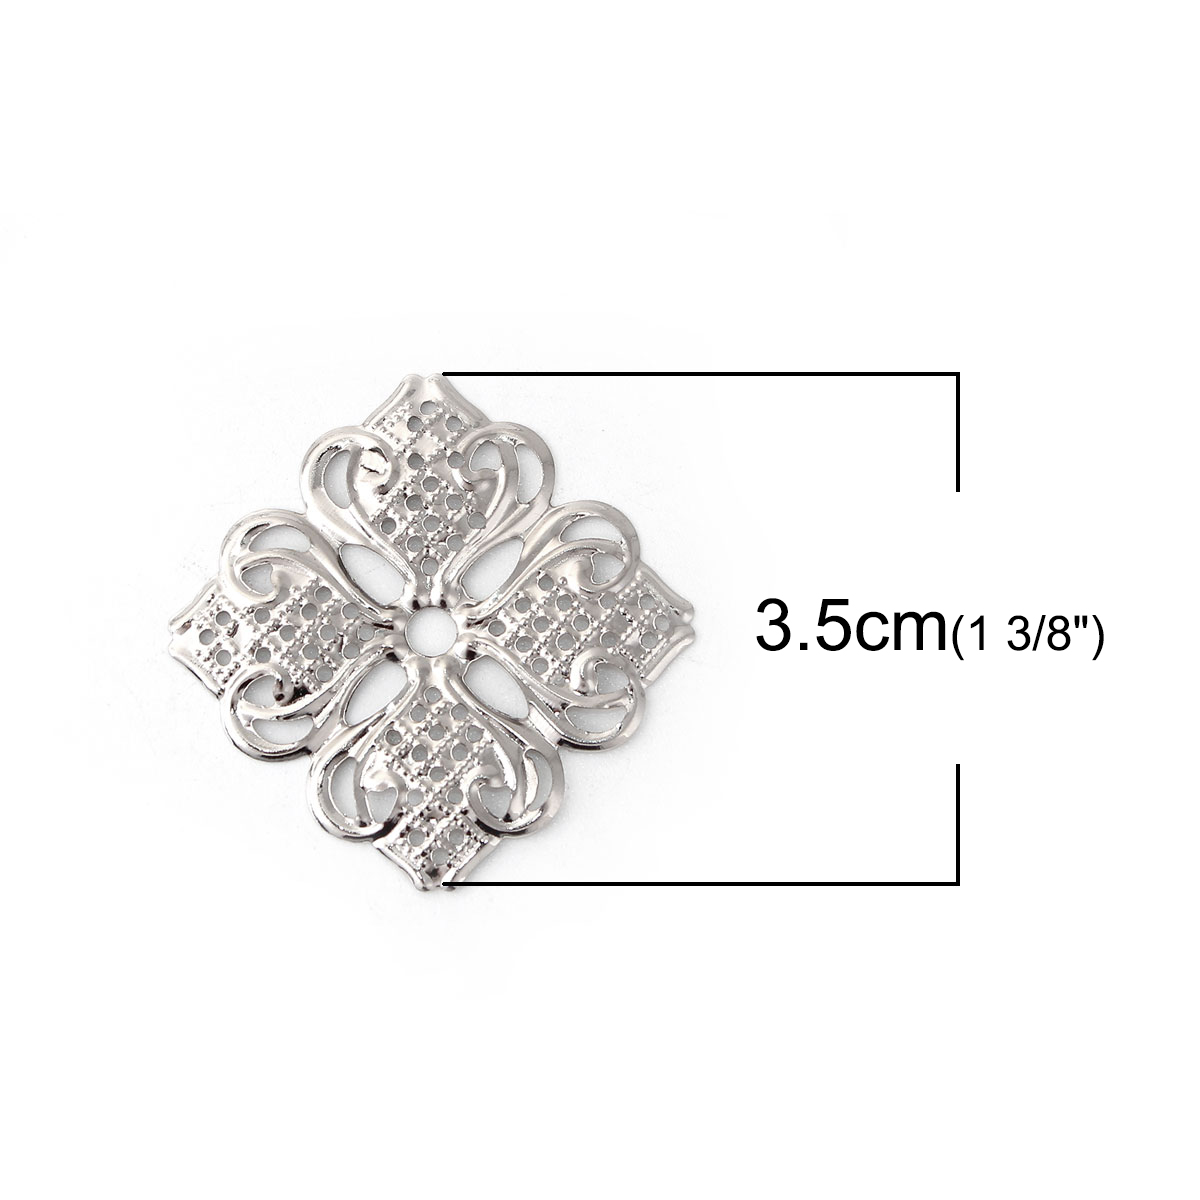 Picture of Iron Based Alloy Embellishments Flower Silver Tone Filigree 35mm(1 3/8") x 35mm(1 3/8"), 50 PCs